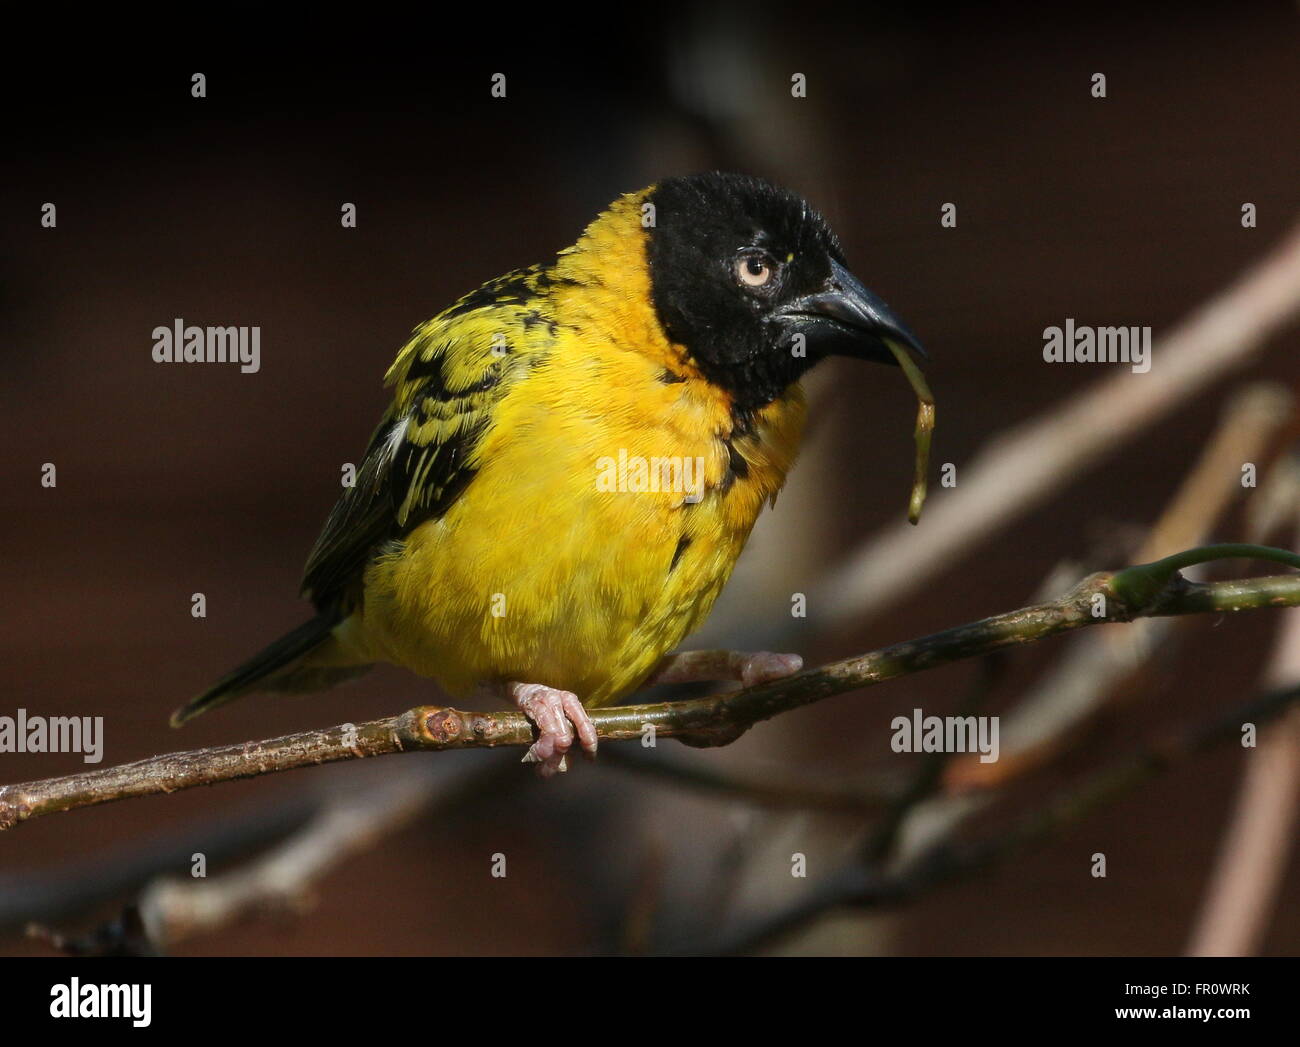 Male African Village Weaver bird (Ploceus cucullatus) collecting nest material. A.k.a. Black-headed or Spotted-backed weaver Stock Photo